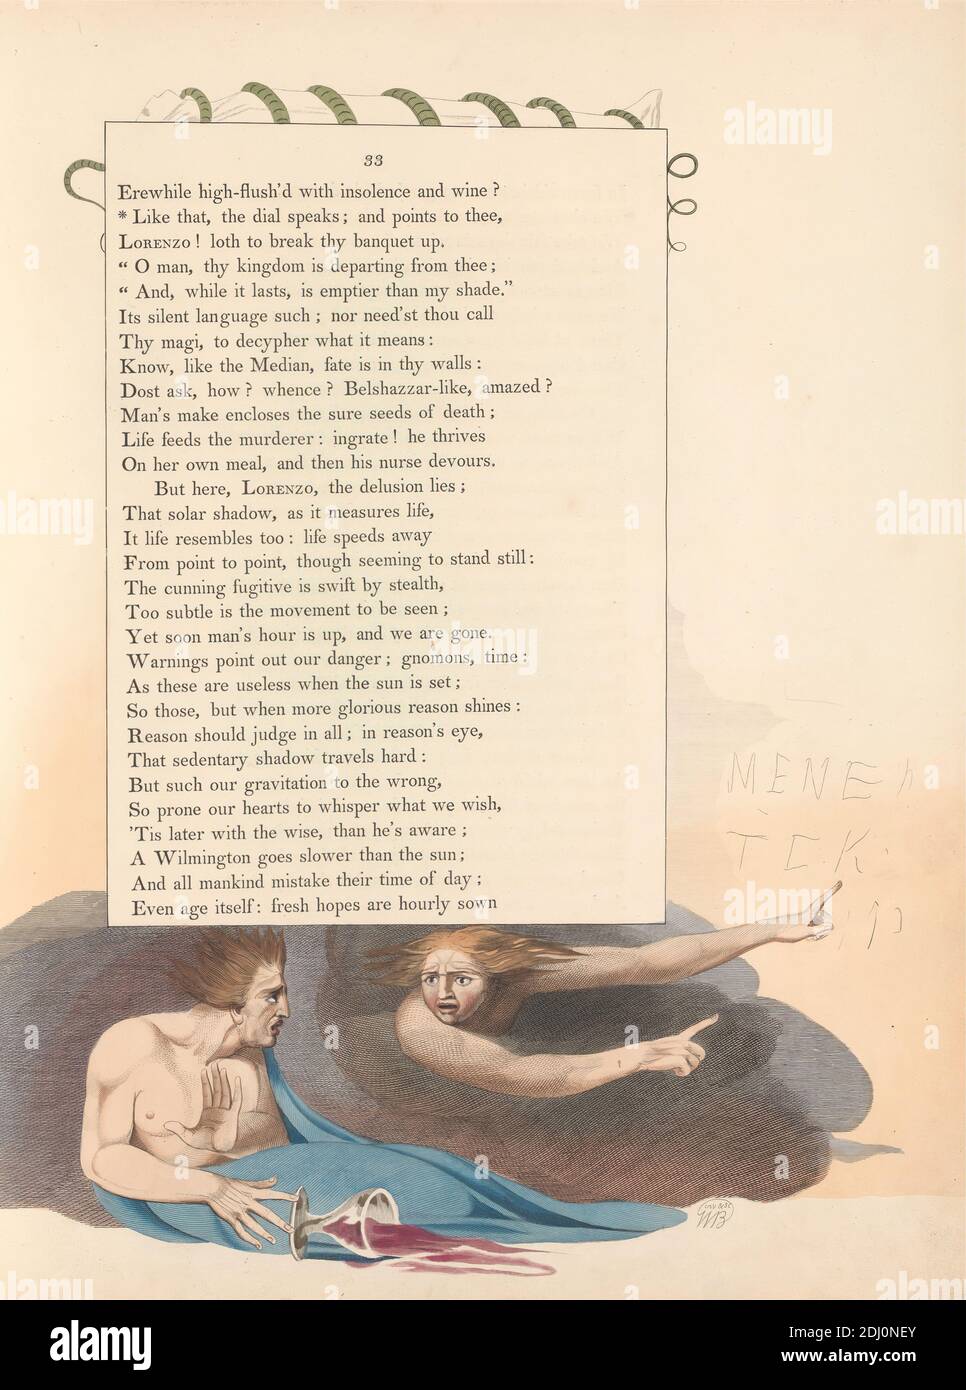 Young's Night Thoughts, Page 33, 'Like That, the Dial Speaks; and Points to Thee', Print made by William Blake, 1757–1827, British, 1797, Etching and line engraving with watercolor on moderately thick, slightly textured, cream wove paper, Spine: 17 1/2 inches (44.5 cm), Sheet: 16 1/2 x 12 7/8 inches (41.9 x 32.7 cm), and Plate: 16 x 12 5/8 inches (40.6 x 32.1 cm), bed, cup, dead, death, food, goblet, literary theme, man, men, pointing, religious and mythological subject, serpent, snake, wine, wine-glasses, woman Stock Photo